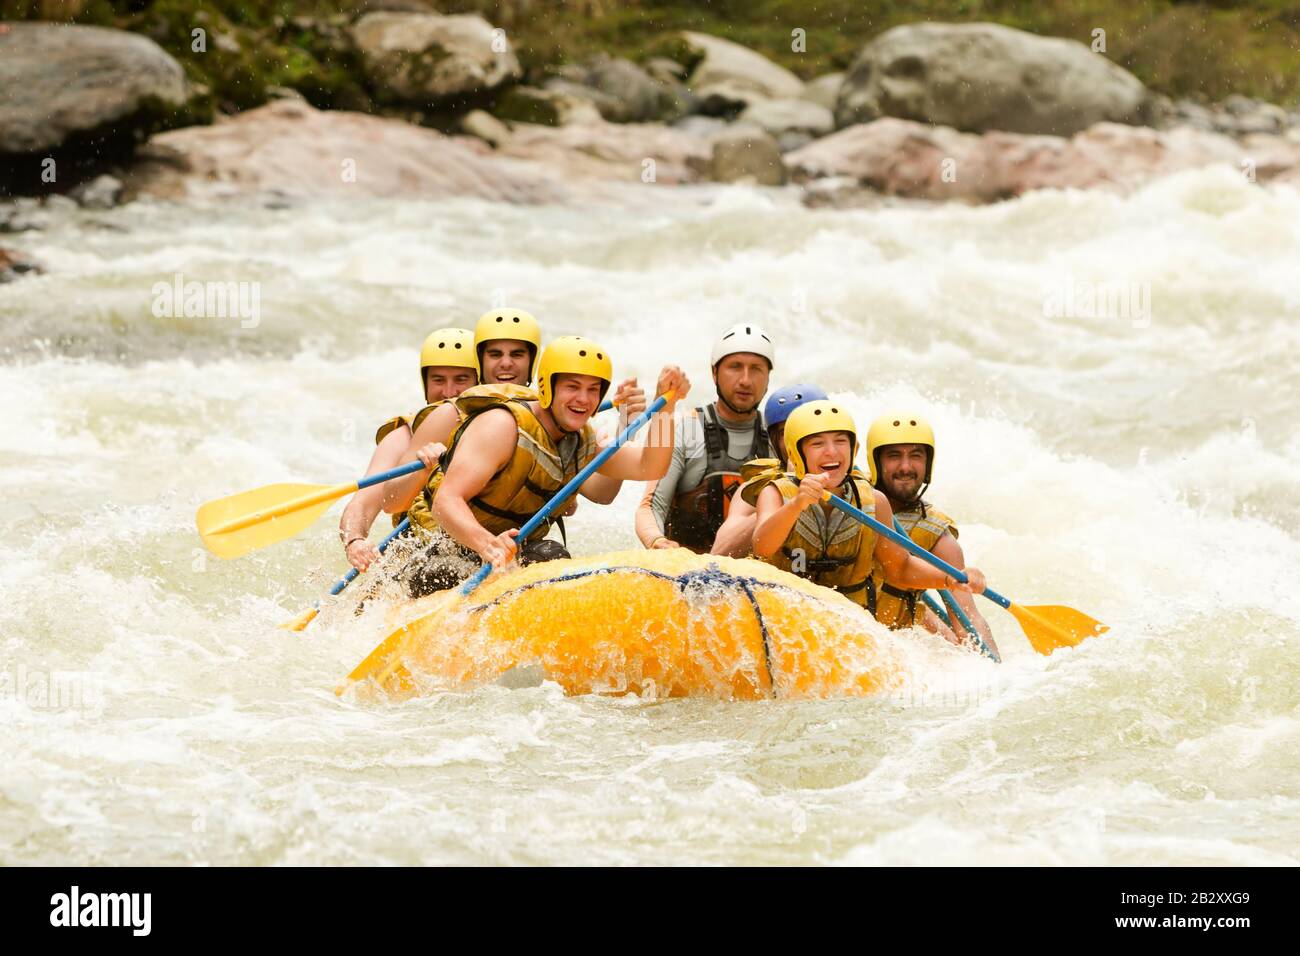 Community Of Mixed Pioneer Human And Lady With Guided By Professional Pilot On Whitewater Creek Rafting In Ecuador Stock Photo